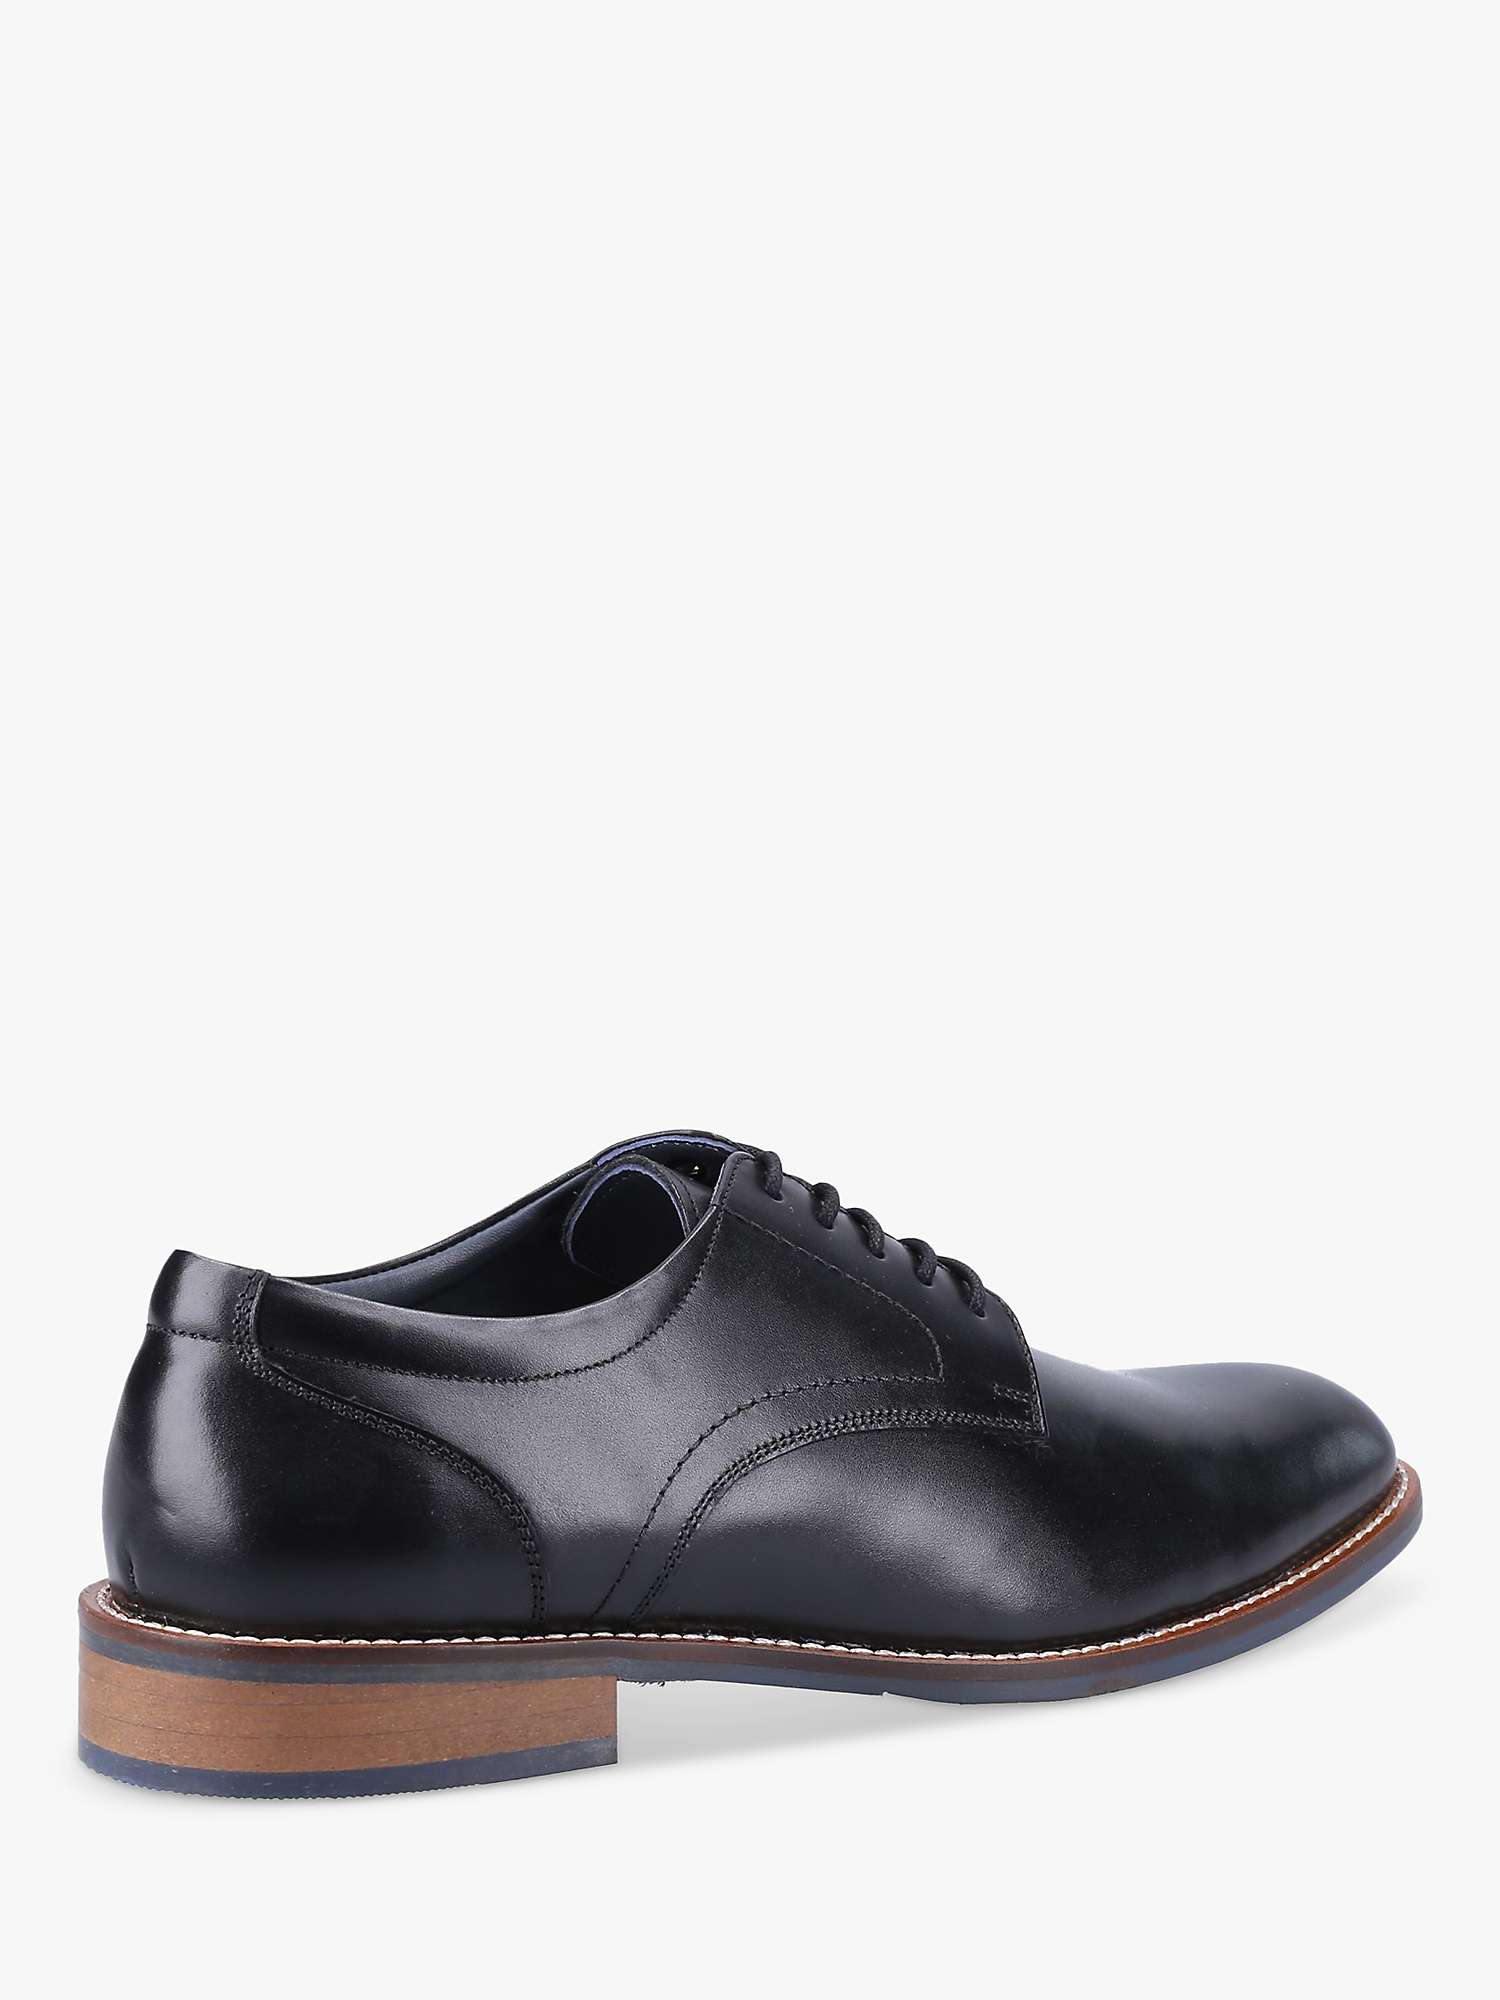 Buy Hush Puppies Damien Leather Derby Shoes Online at johnlewis.com